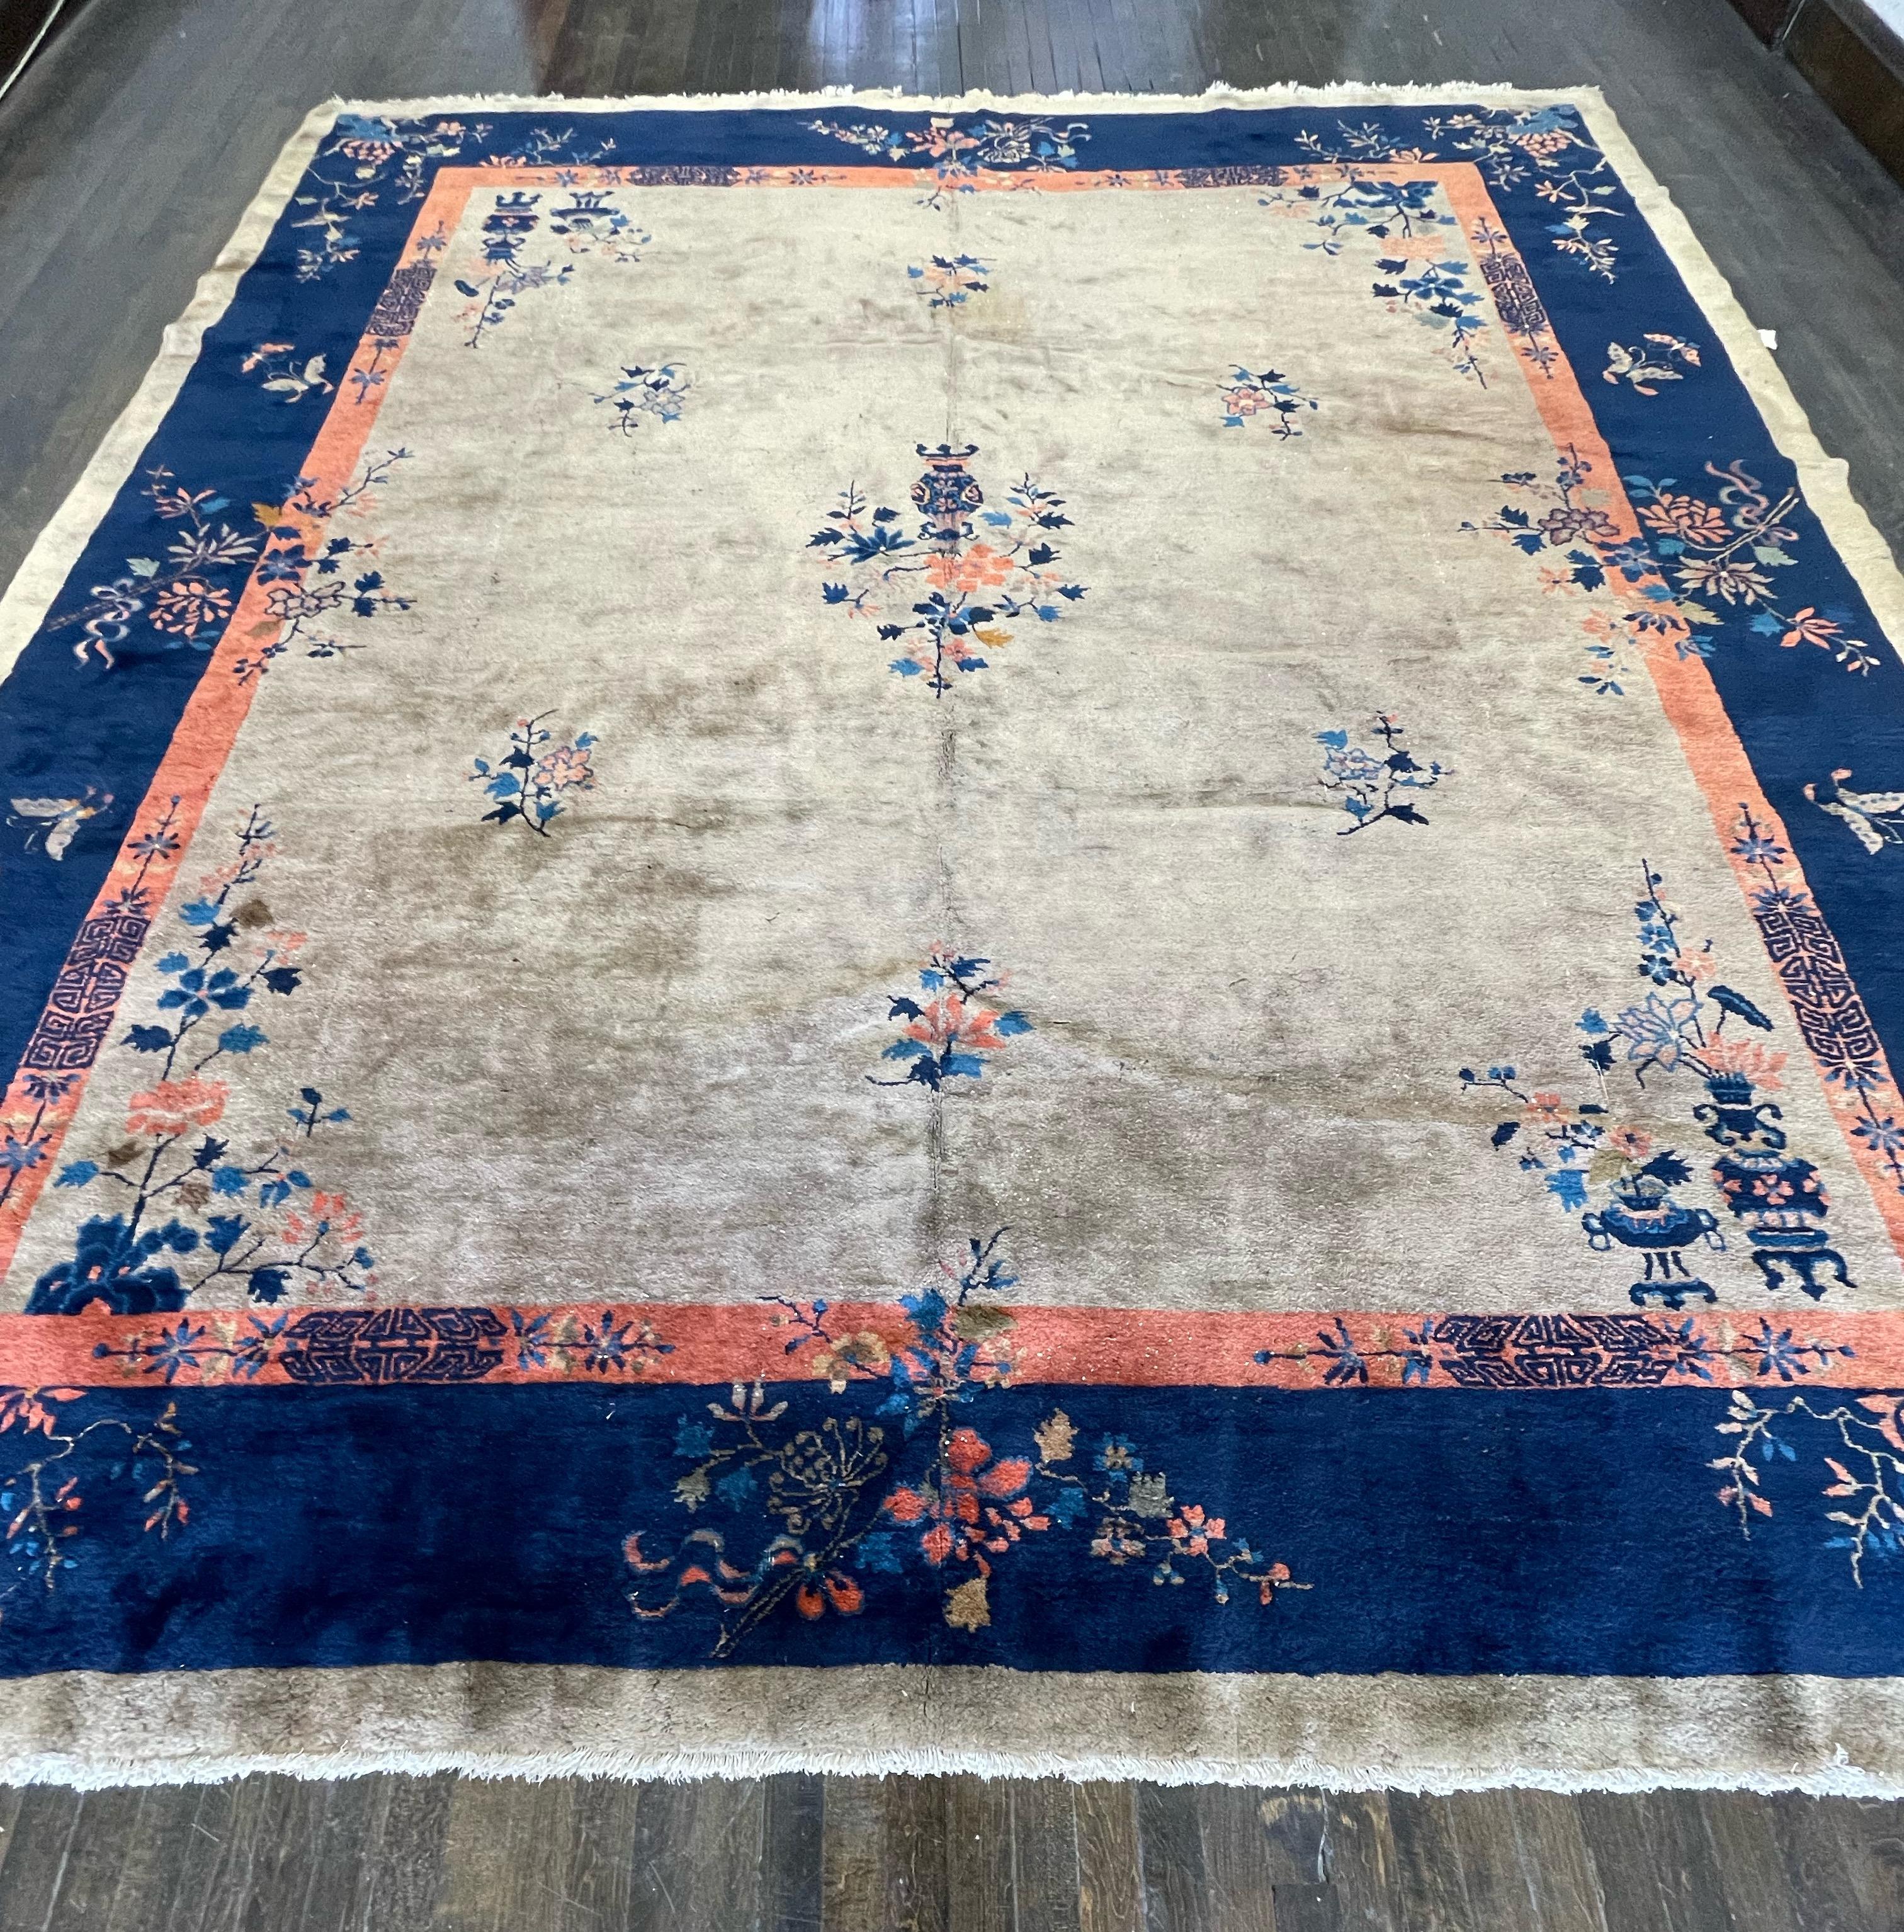 This carpet is hand knotted in China. The high quality wool and all organic dyes has made this carpet age well with fantastic patina. The field has a soft tan with beautifully simple motifs that are well spaced that goes well with indigo blue